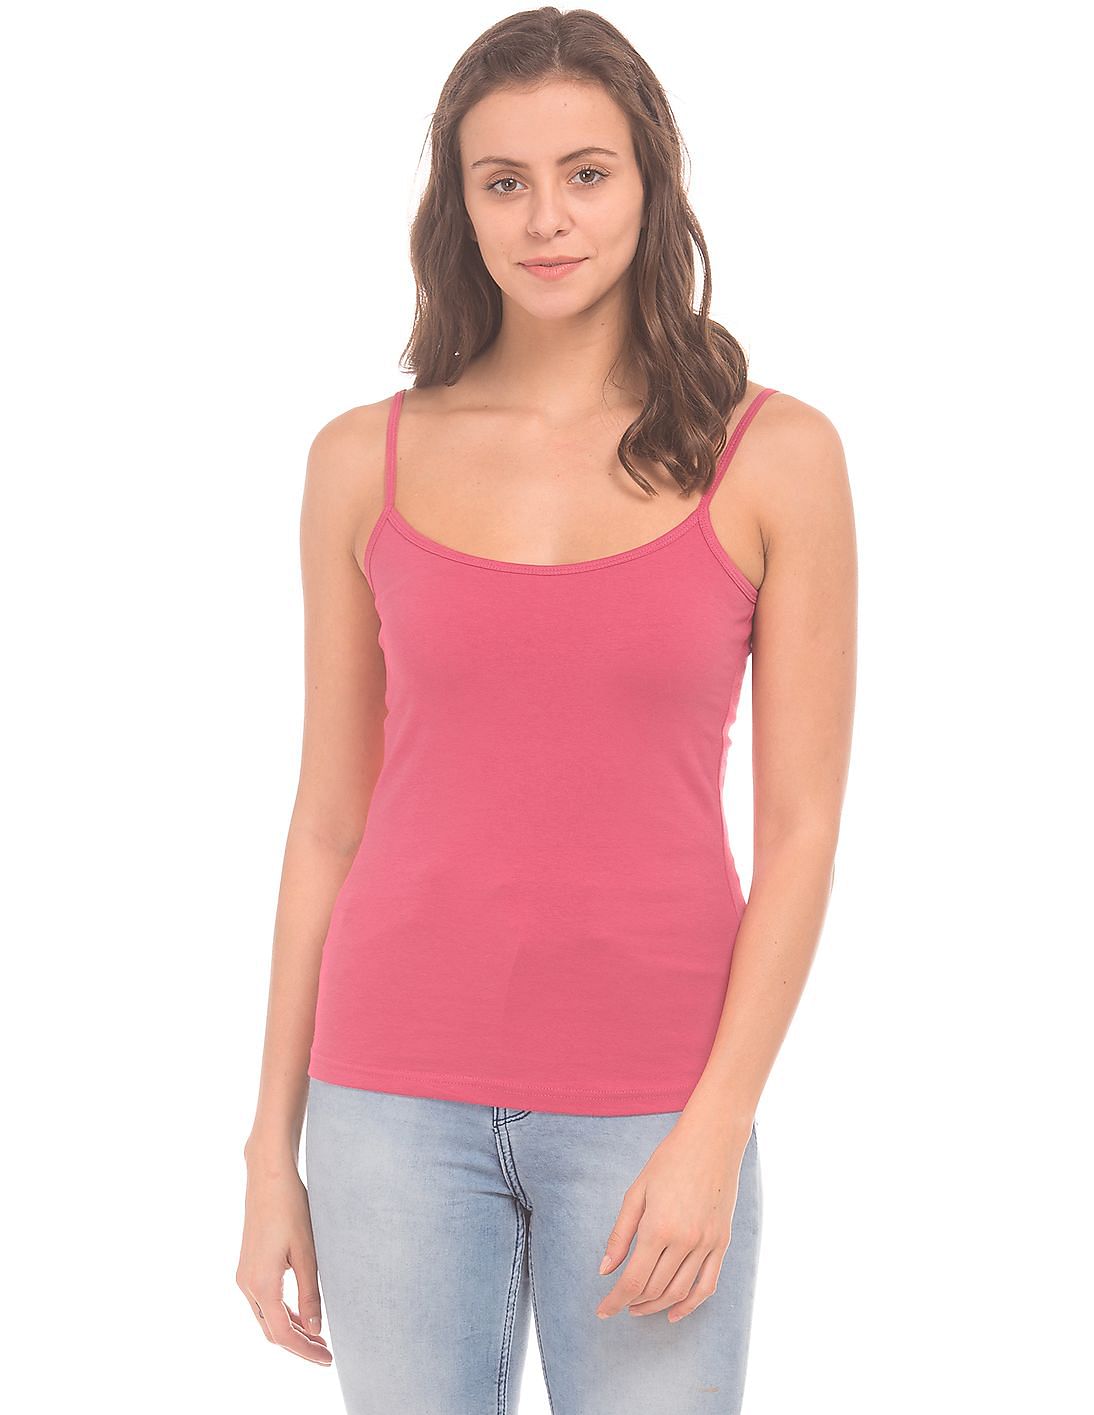 Buy Unlimited Women Solid Cotton Stretch Camisole - NNNOW.com